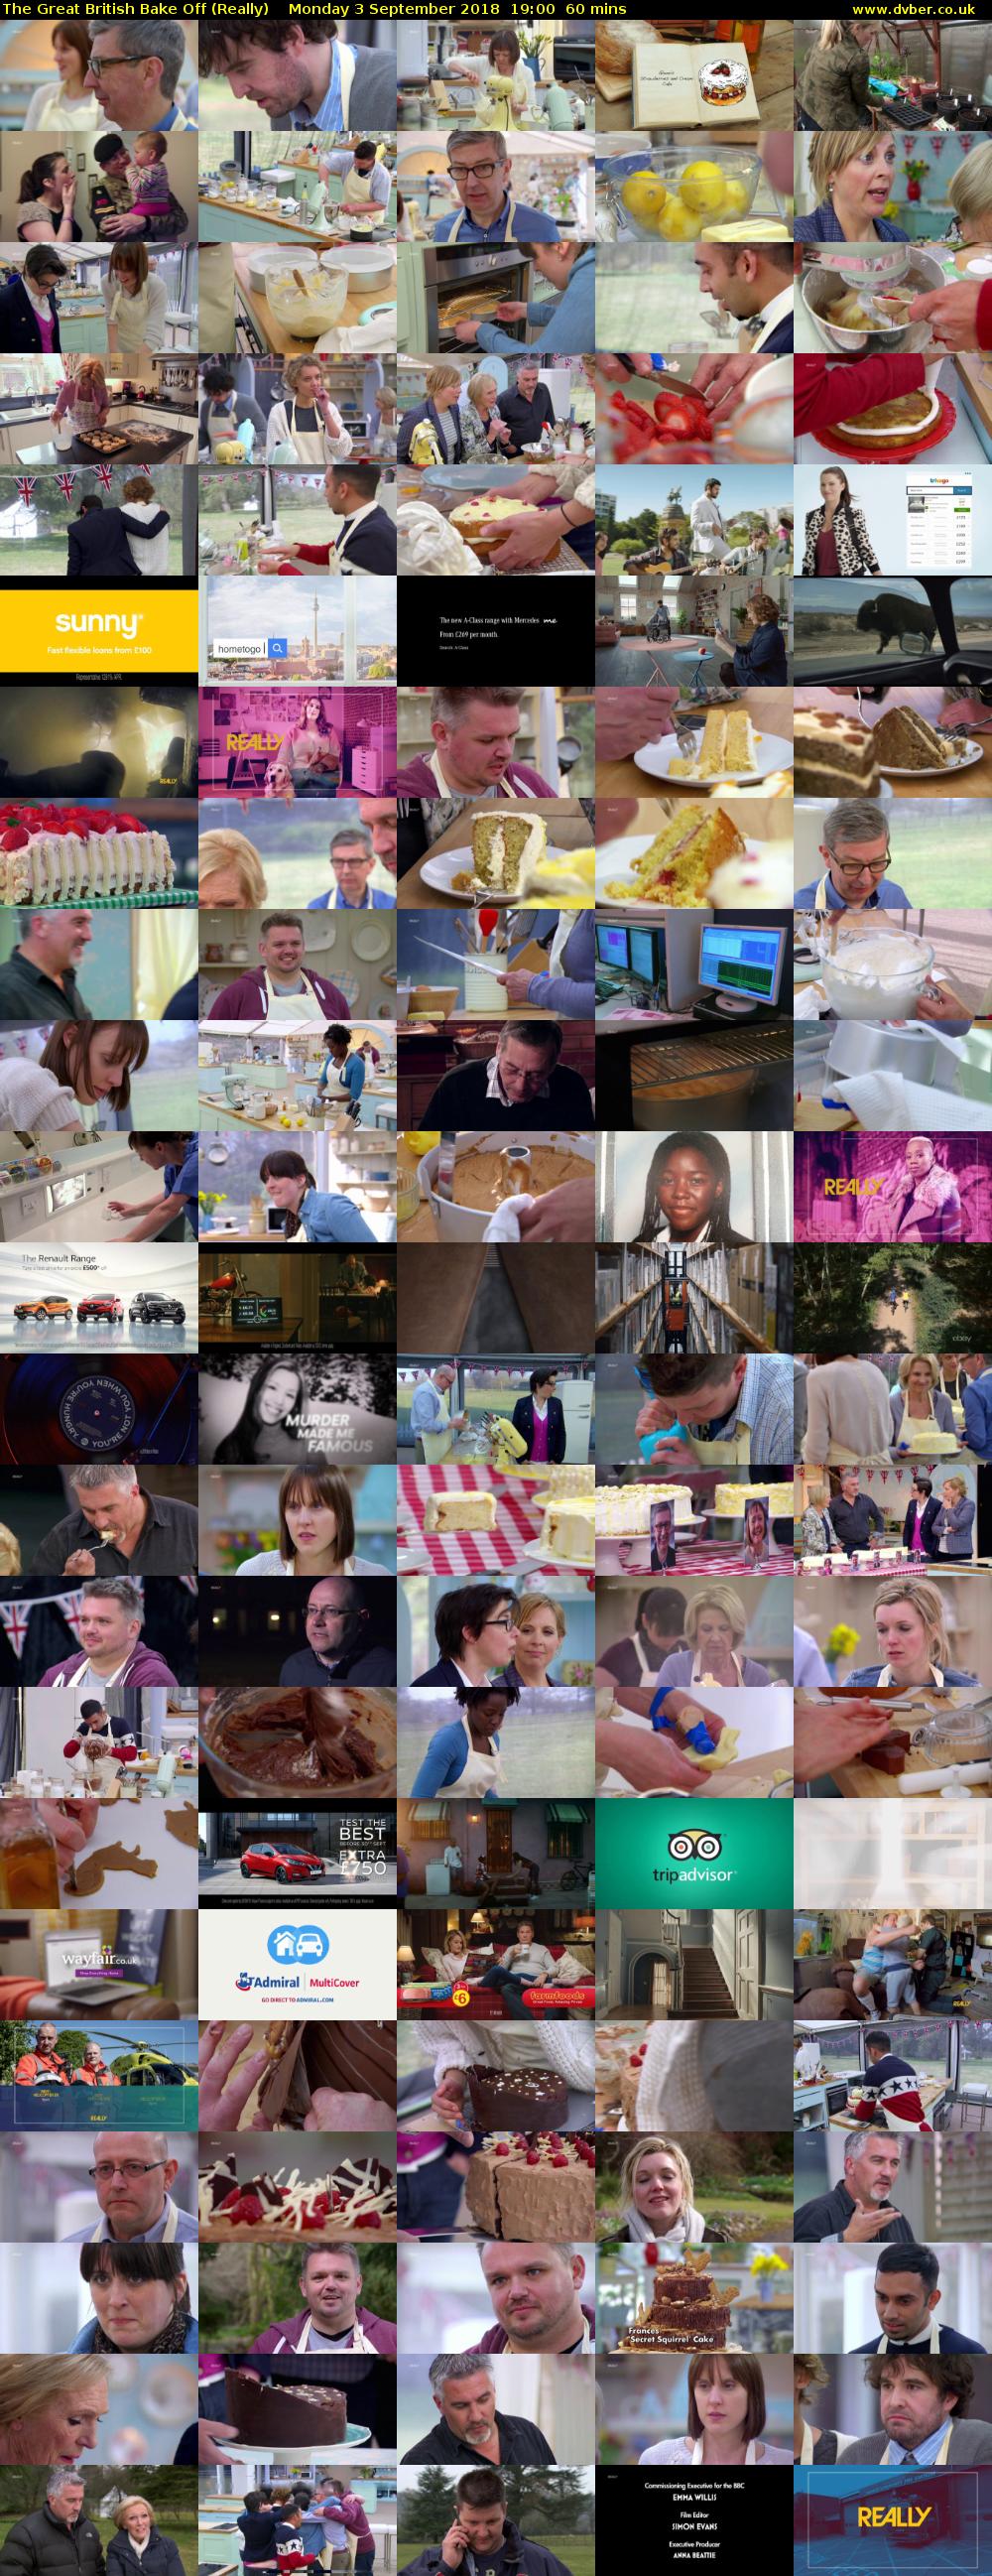 The Great British Bake Off (Really) Monday 3 September 2018 19:00 - 20:00